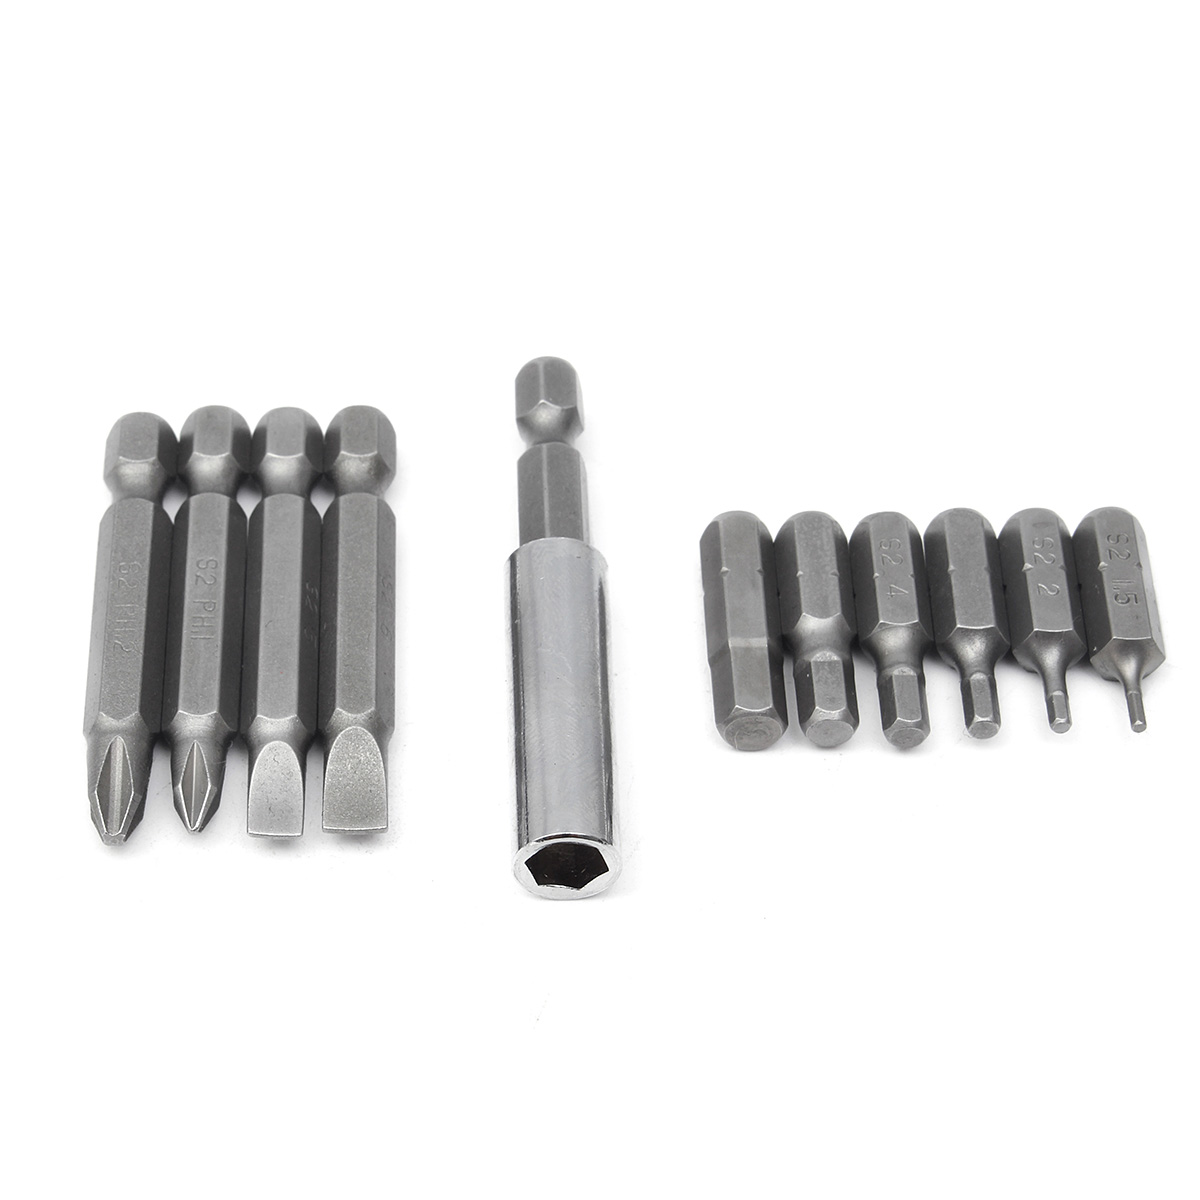 PENGGOOG-0634-11Pcs-Magnetic-Screwdriver-Bits-Slotted-Phillips-Torx-S2-Alloy-Steel-H6-Electric-Screw-1147177